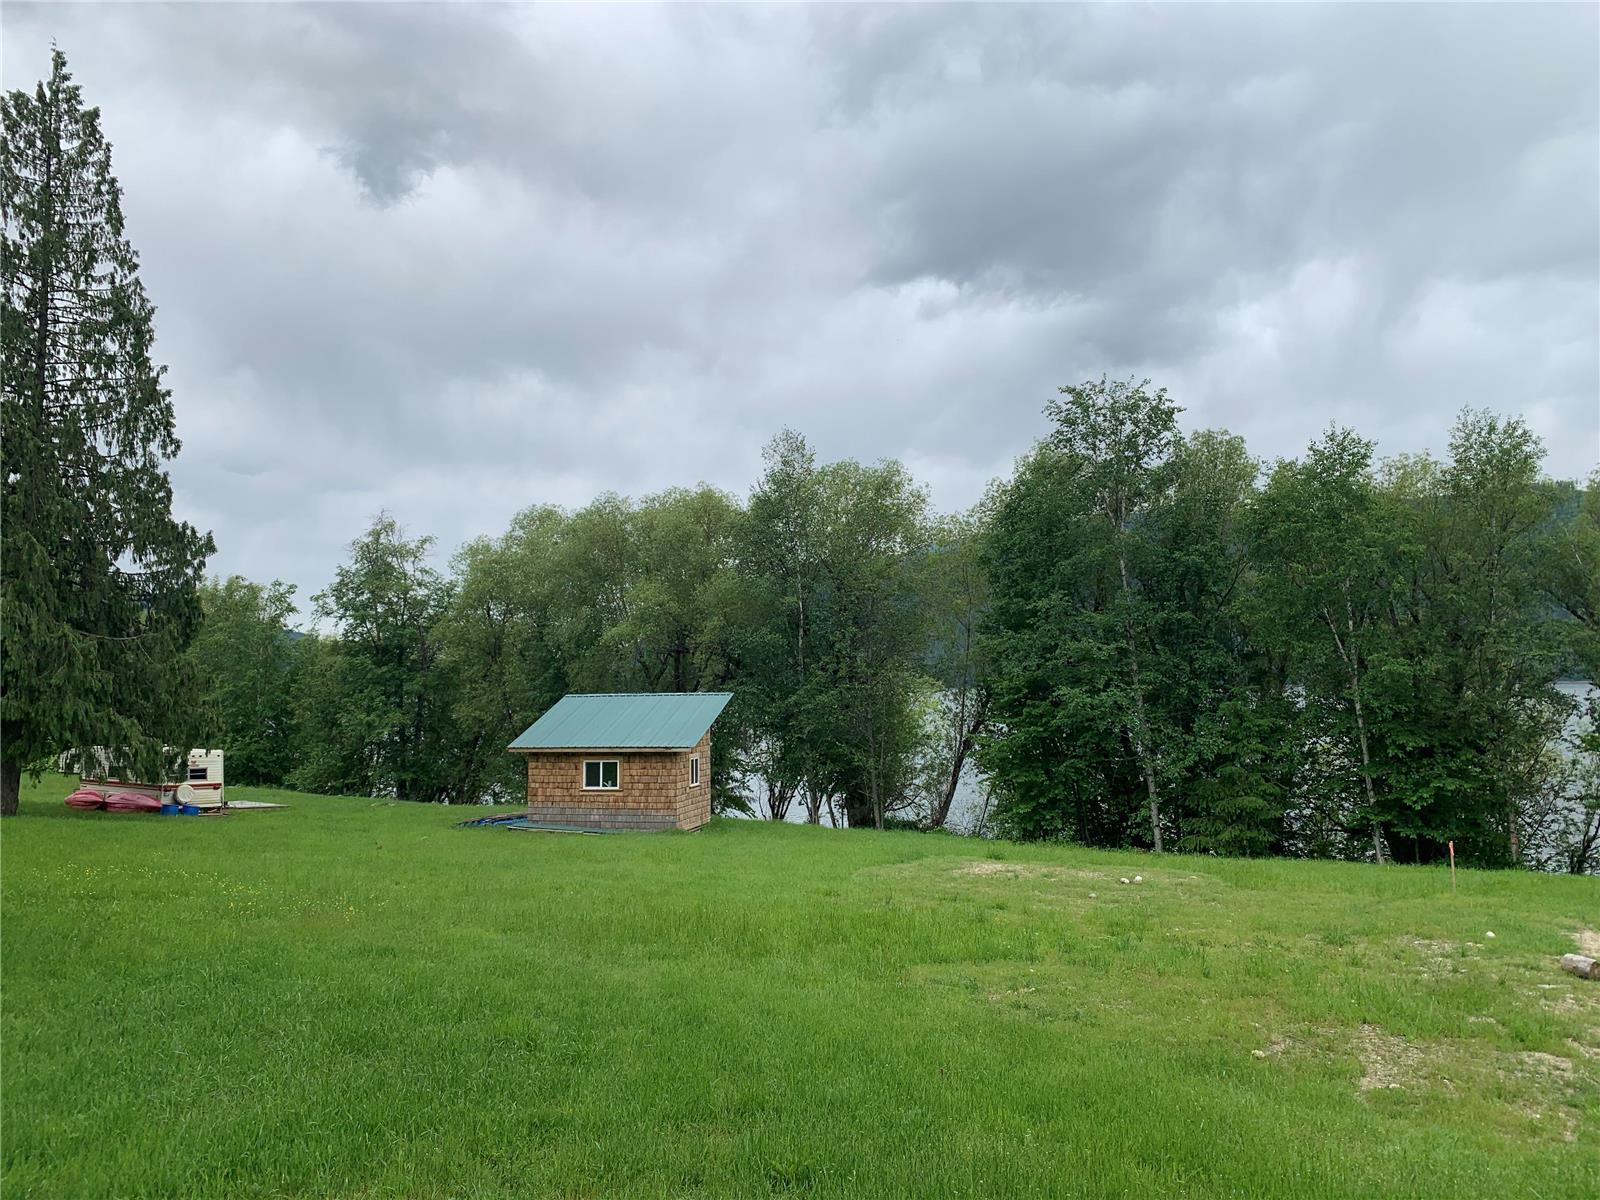      Lot 8 Willow On Anstey Bay Bay  , Sicamous, Shuswap / Revelstoke,  ;  Listing Number: MLS 10255879